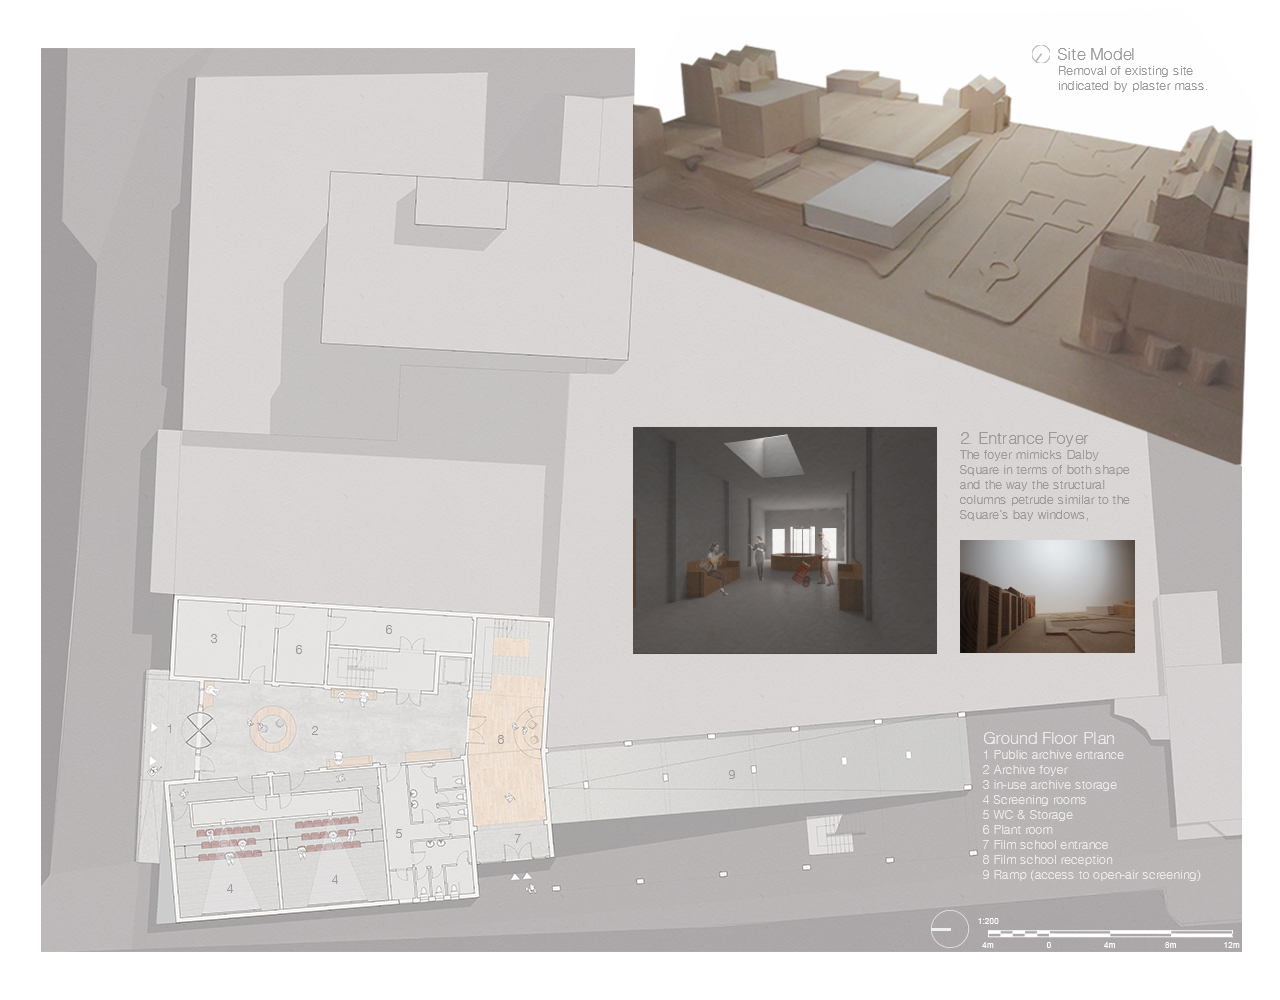 Site Model and ground floor- entrance foyer